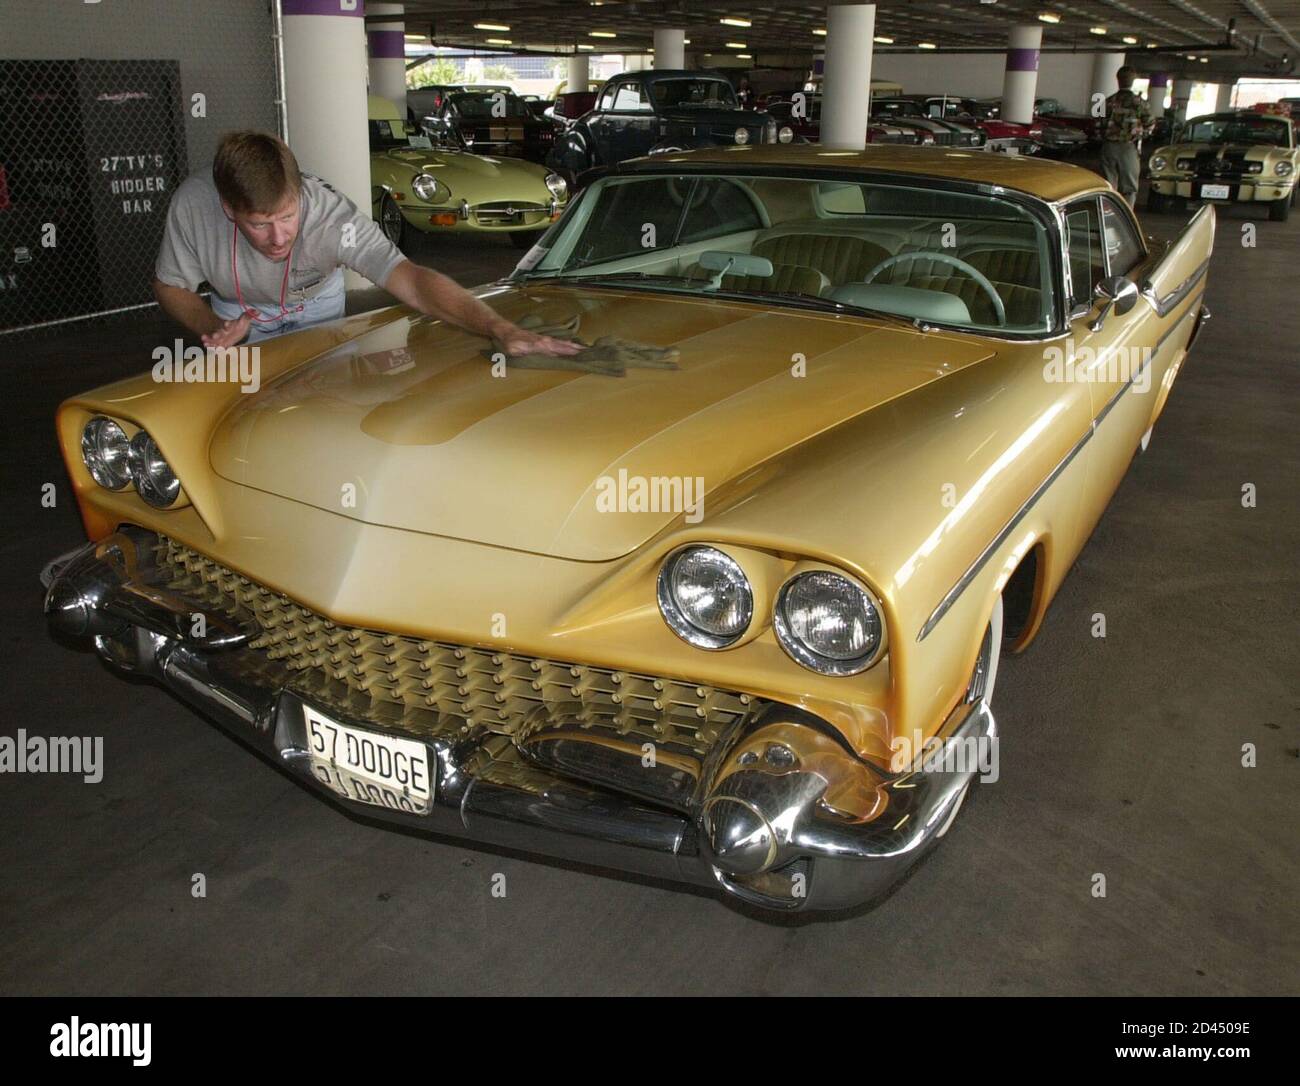 Workman Bob Knowles makes finishing touches on a 1957 Dodge Royal Lancer Custom owned by Brian Setzer June 14, 2001 at the Petersen Automotive Museum in Los Angeles. The museum's exhibit, 'The Cars & Guitars of Rock & Roll,' commemorating 50 years of the genre, opens June 15 through December 31, 2001. Setzer's car will be offered at auction this weekend.  JR/JP Stock Photo